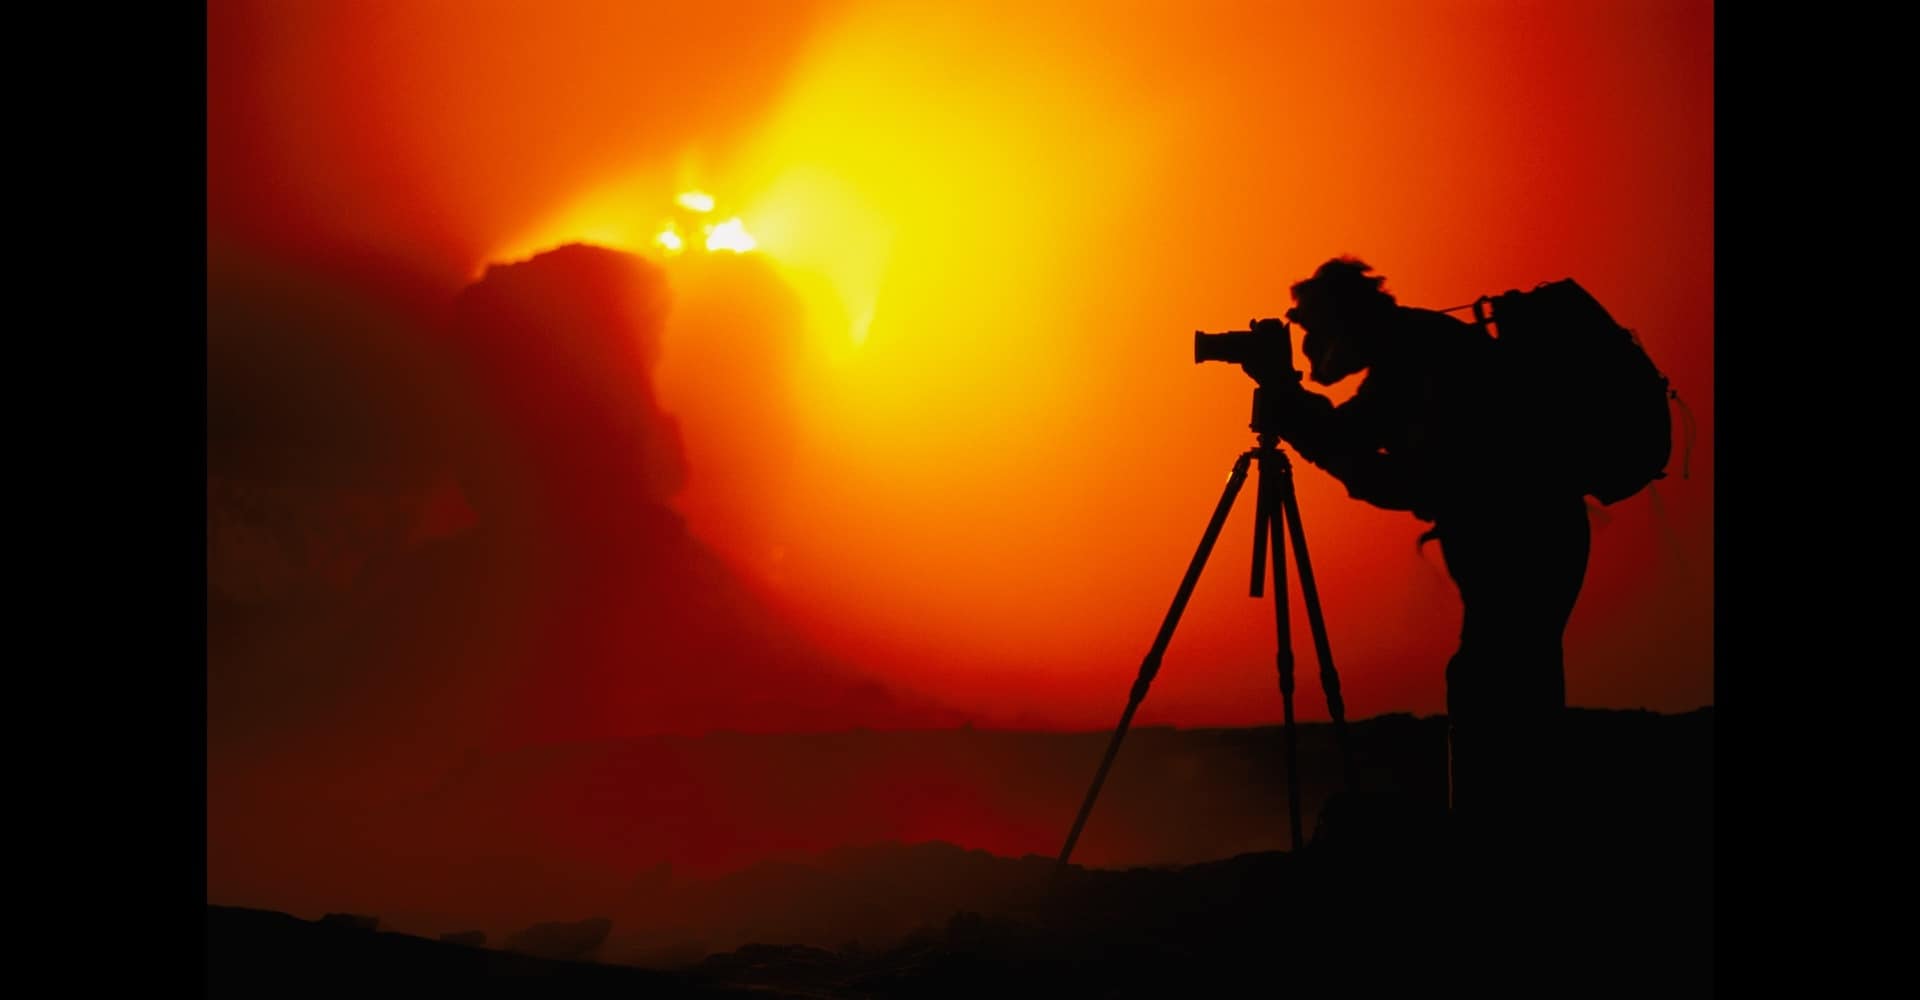 Frans Lanting photographing an erupting volcano, Hawaii